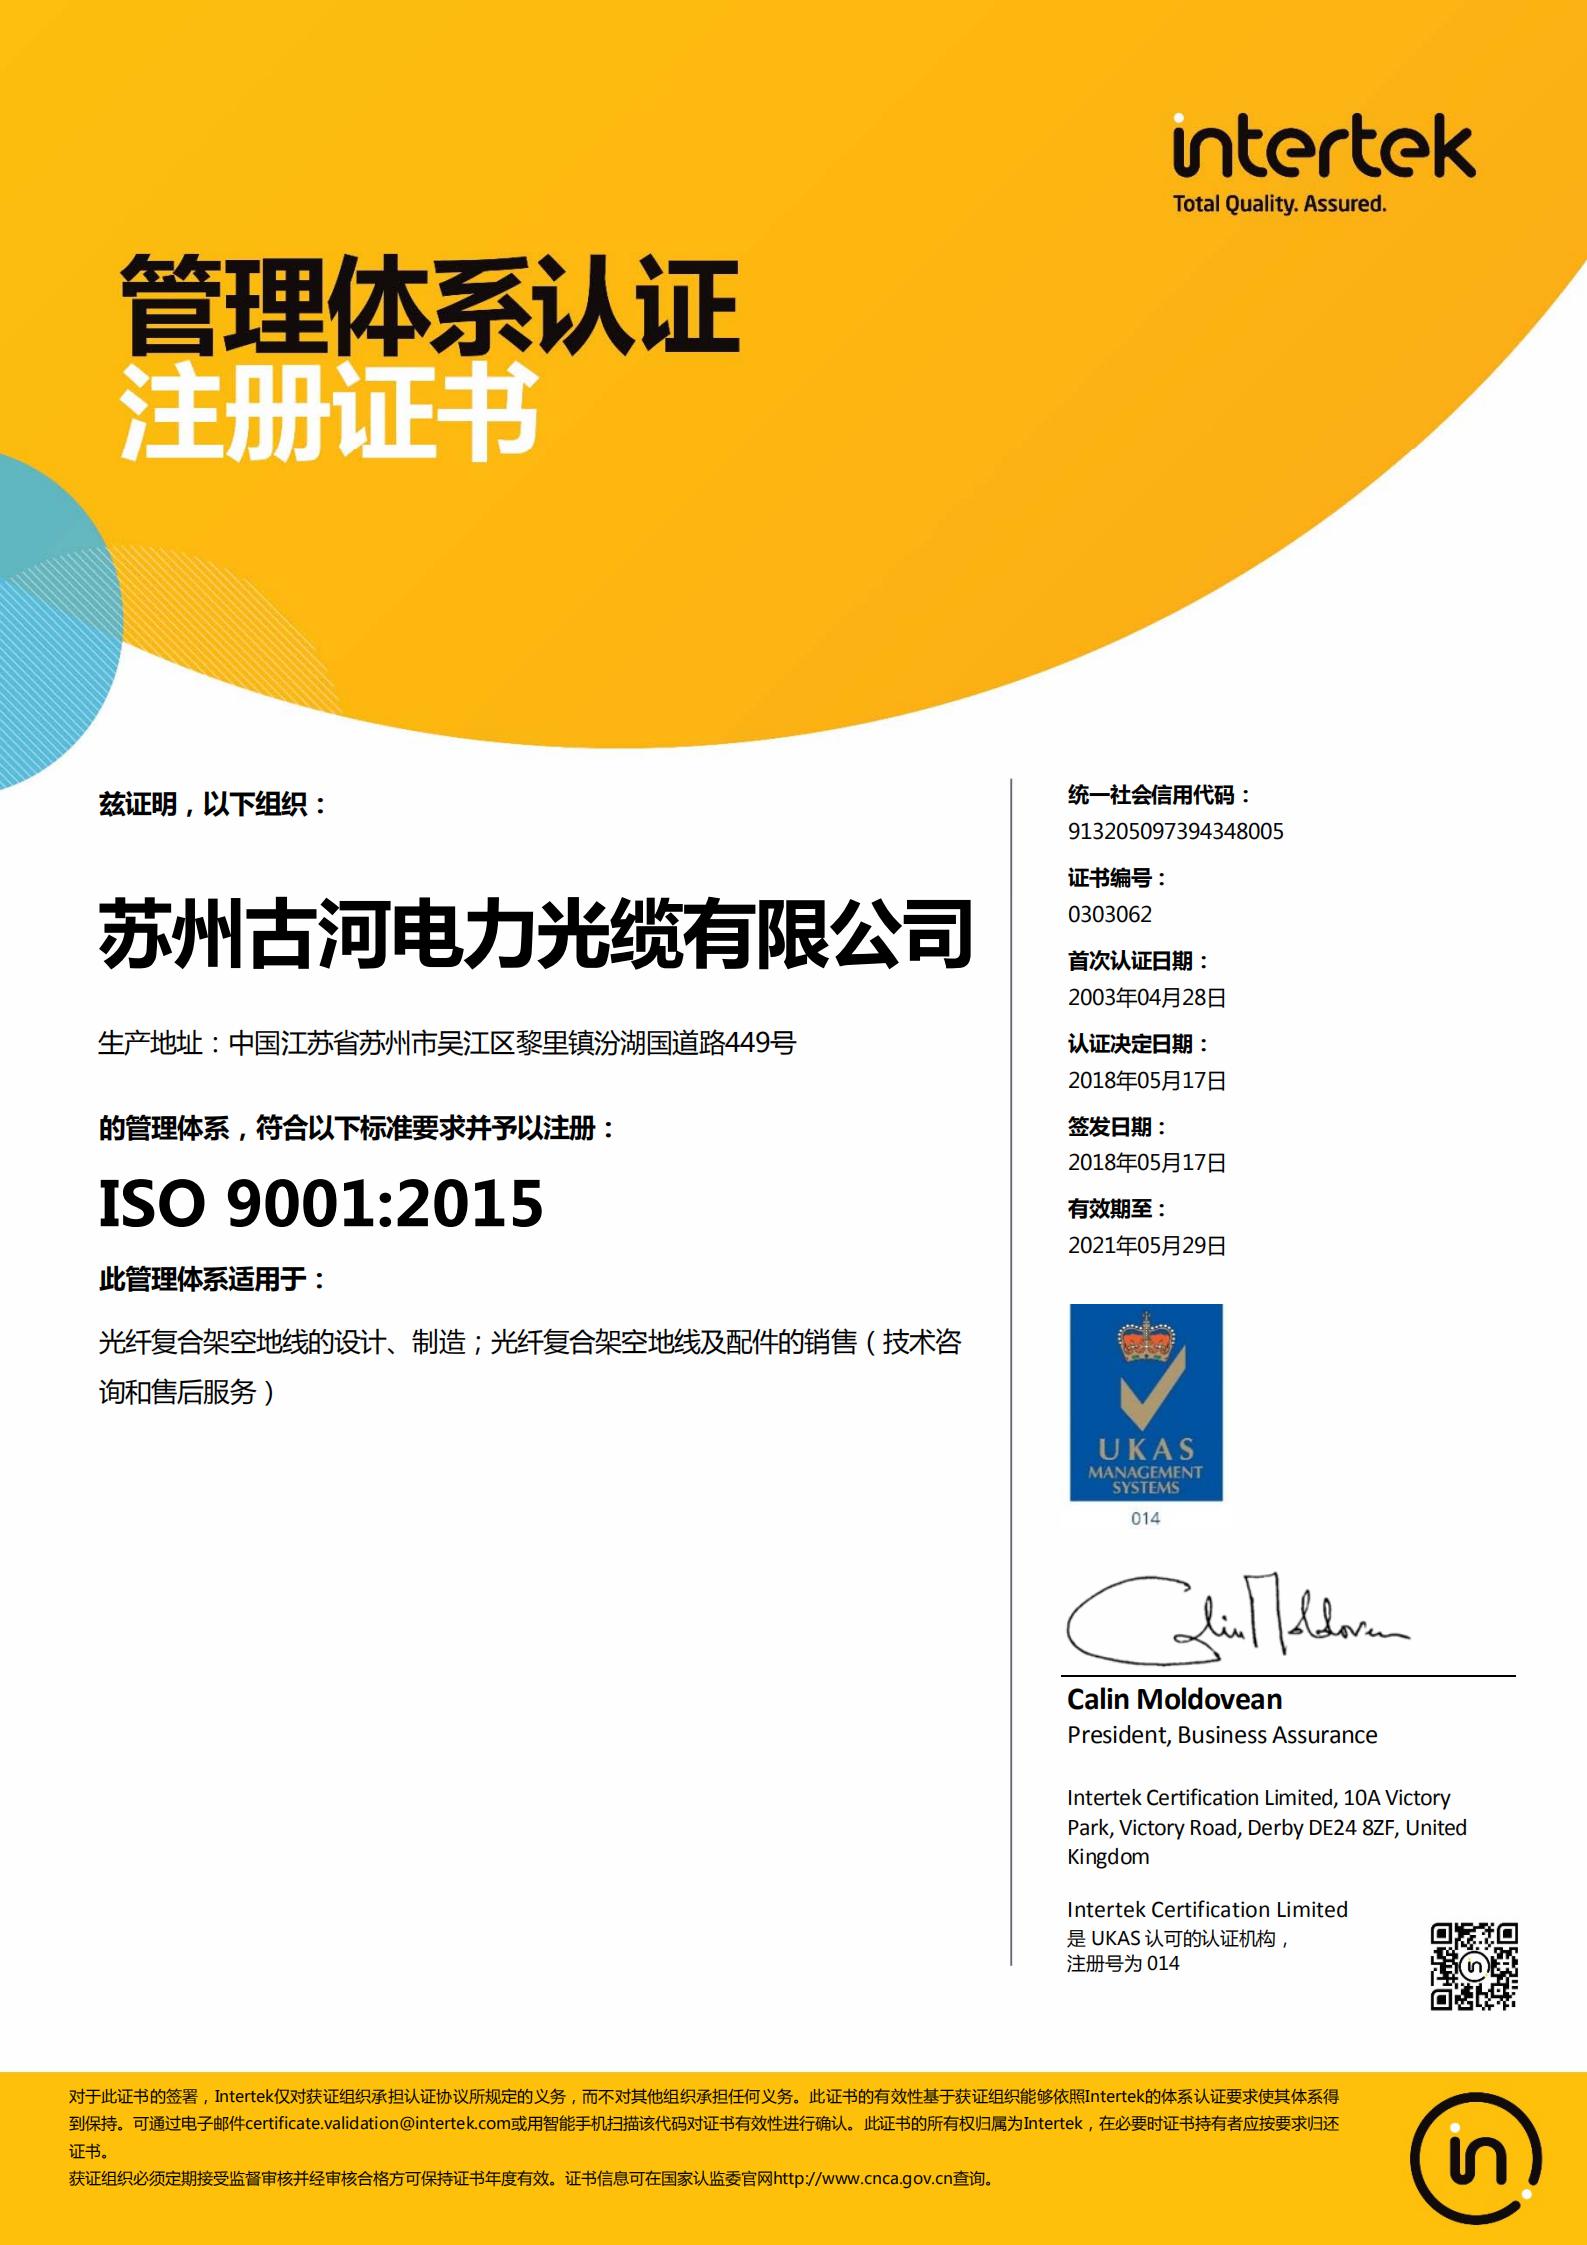 ISO9001 Certificate (2018)